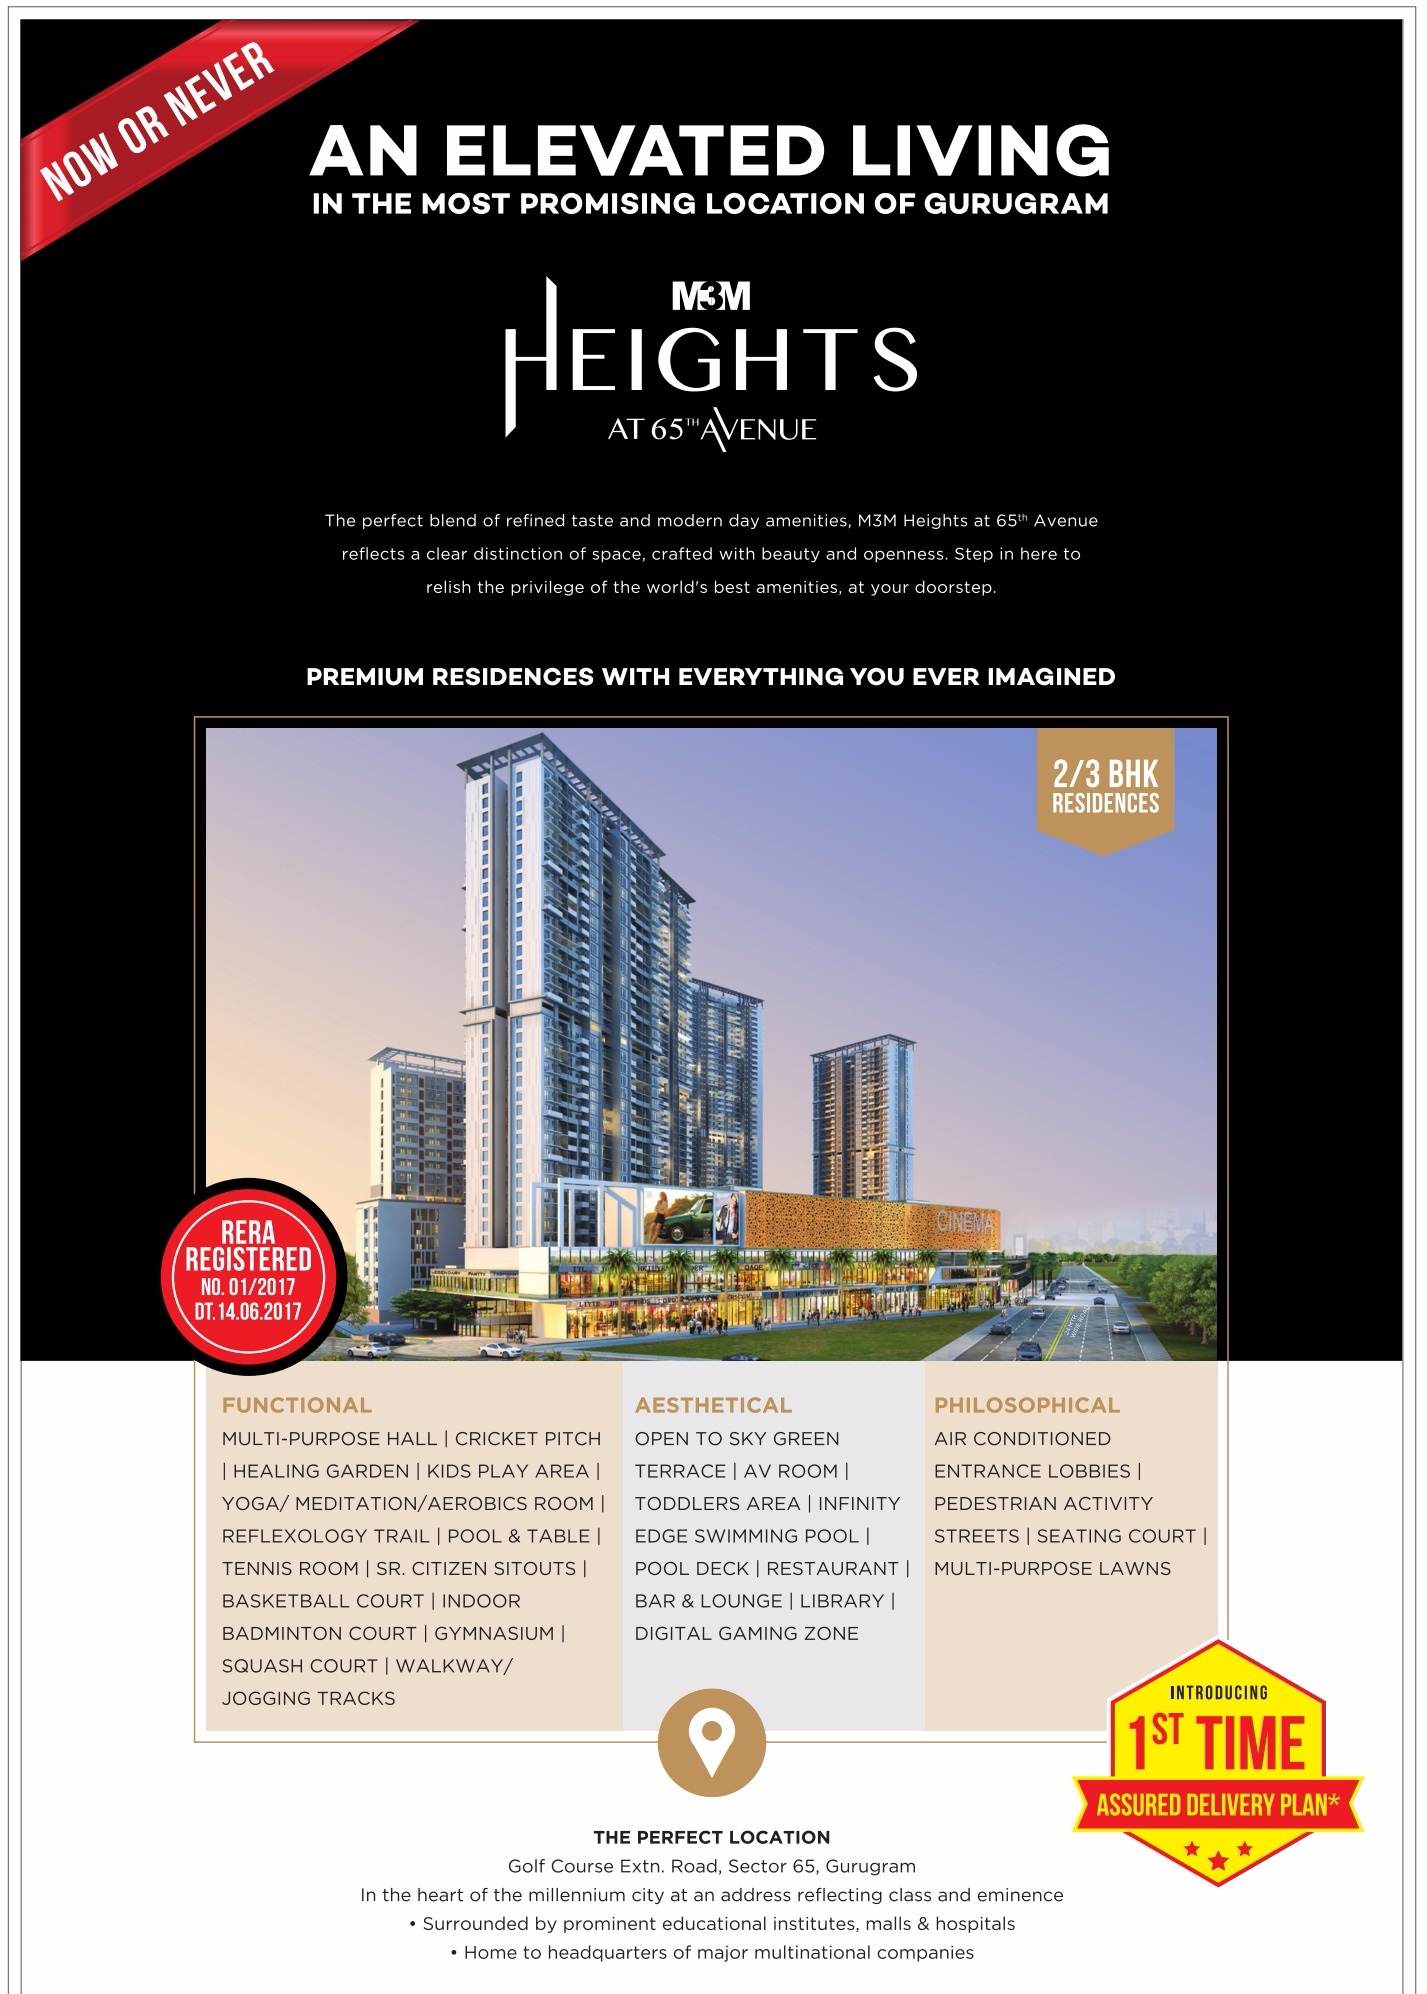 Experience an elevated living with premium residences at M3M Heights 65th Avenue in Gurgaon